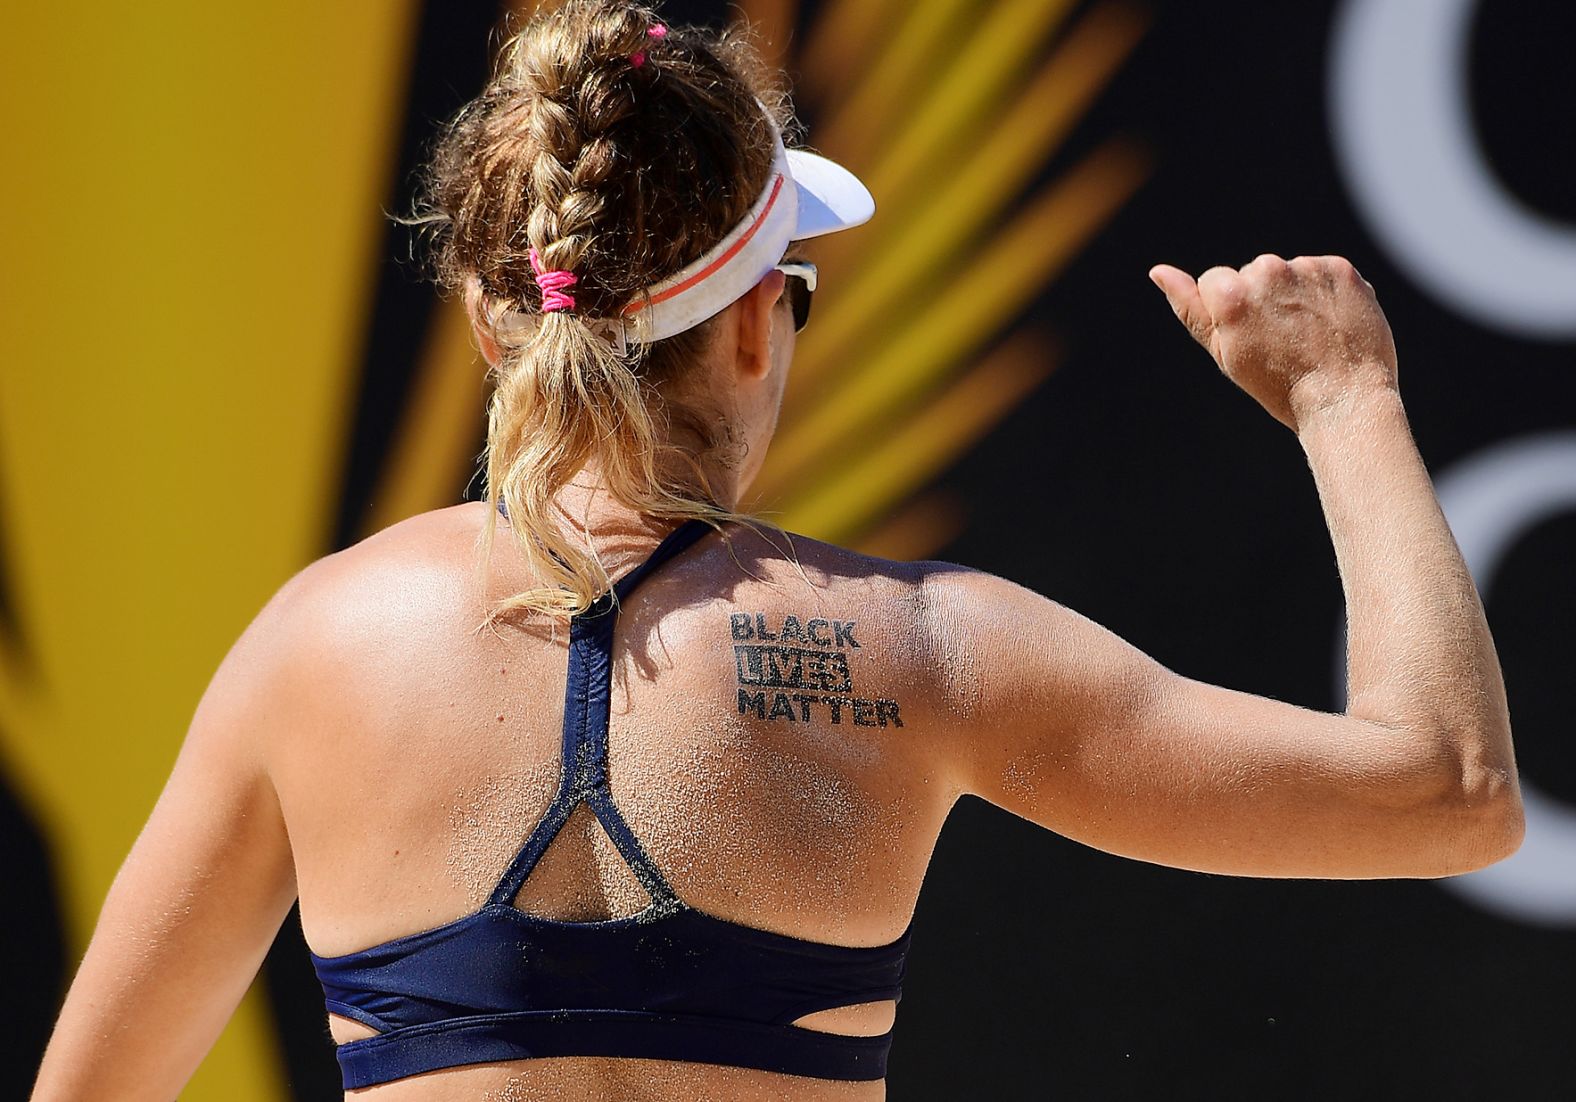 Beach volleyball player April Ross wears a temporary Black Lives Matter tattoo during a match in Long Beach, California, on July 19.